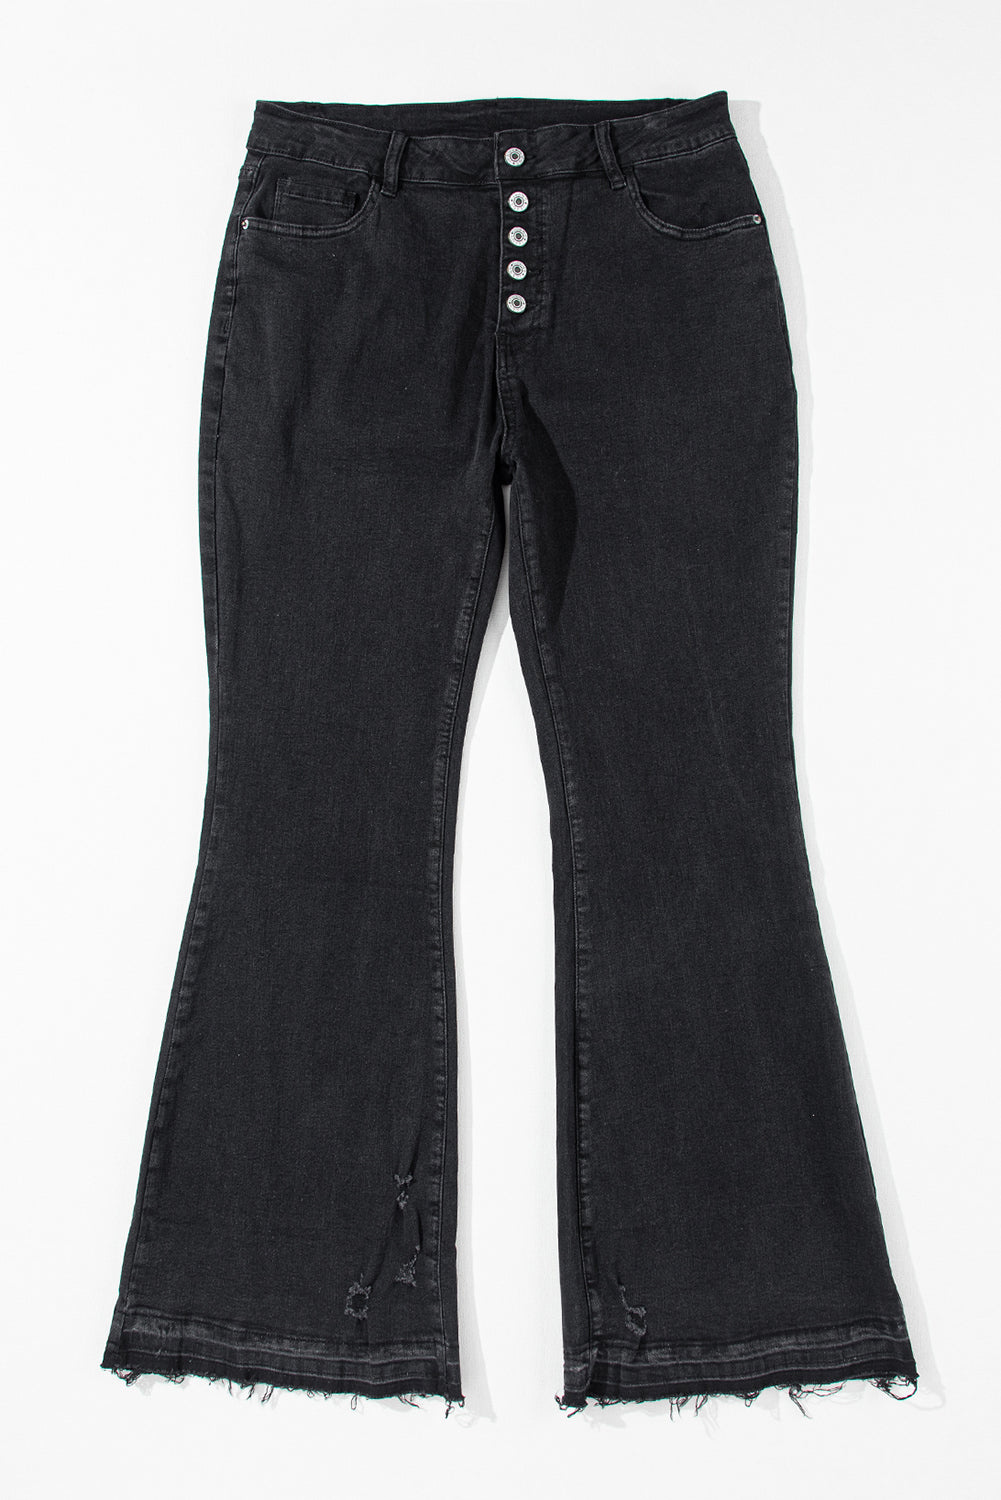 Black High Waist Button Front Flare Jeans